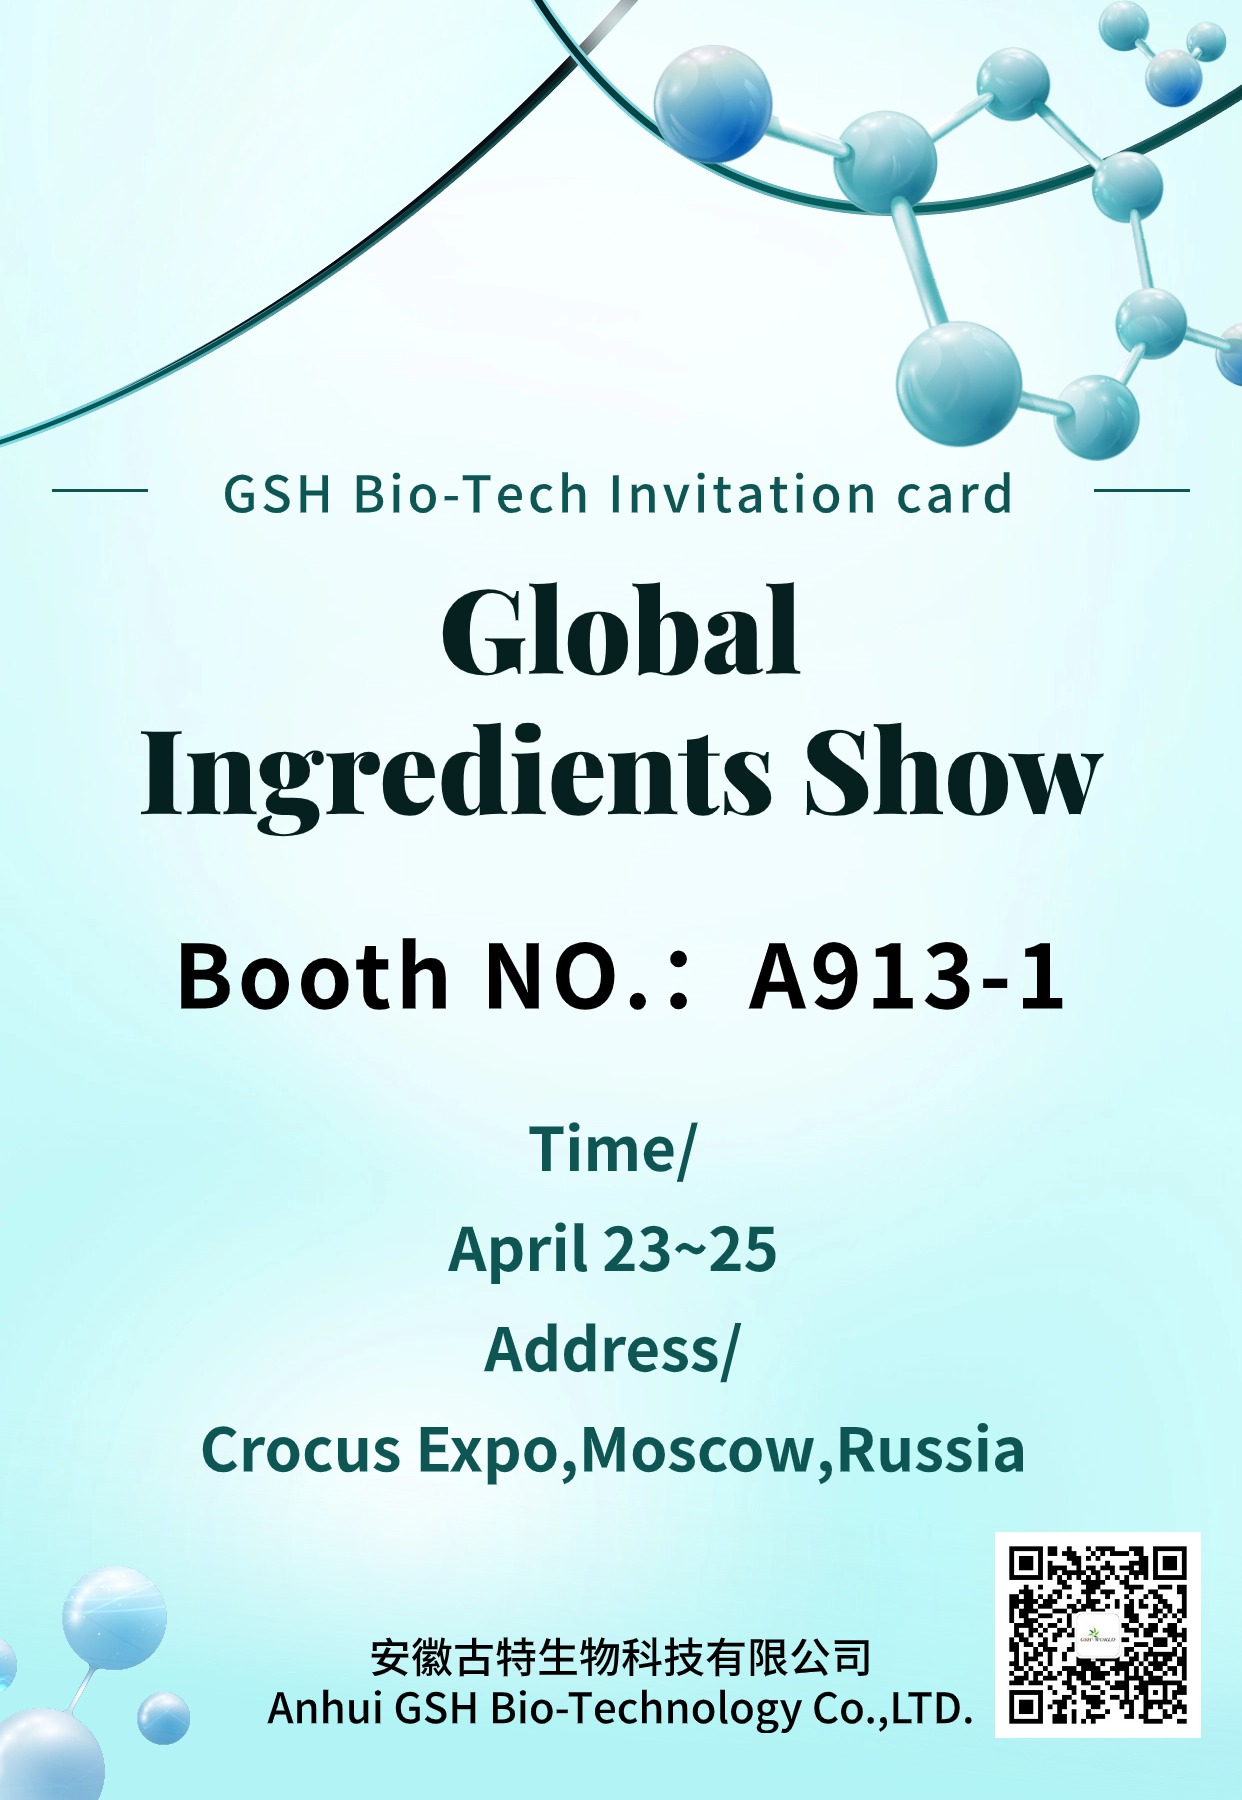 GSH Bio-Tech Co., Ltd. sincerely invite you to attend the Global Ingredients Show in Moscow